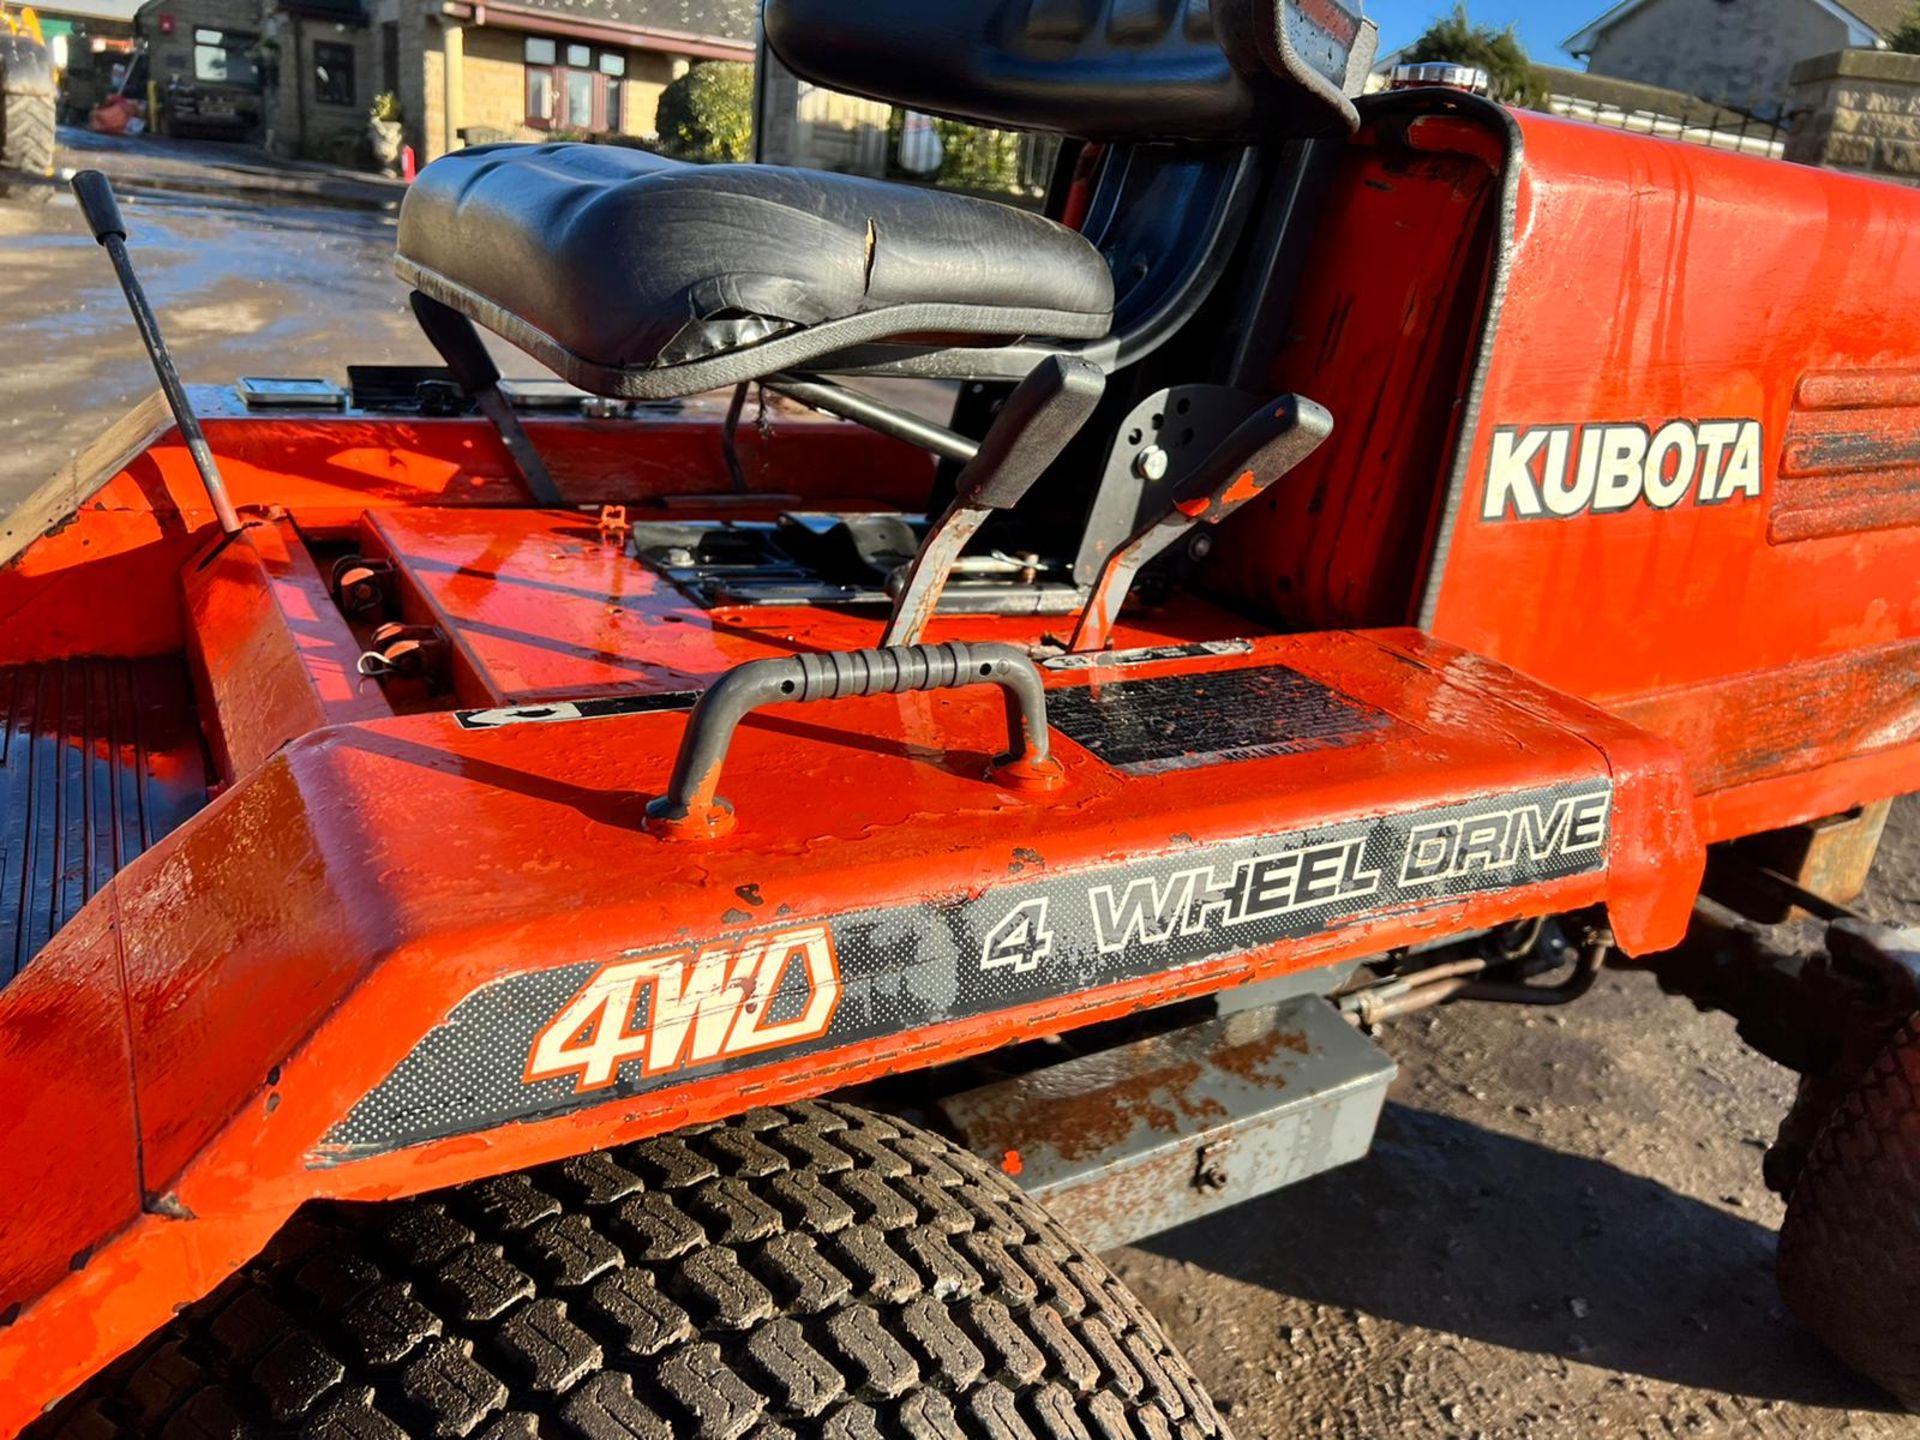 KUBOTA F2400 4WD RIDE ON MOWER, RUNS DRIVES AND CUTS, GOOD SOLID TRIPLE BLADE DECK *PLUS VAT* - Image 10 of 11